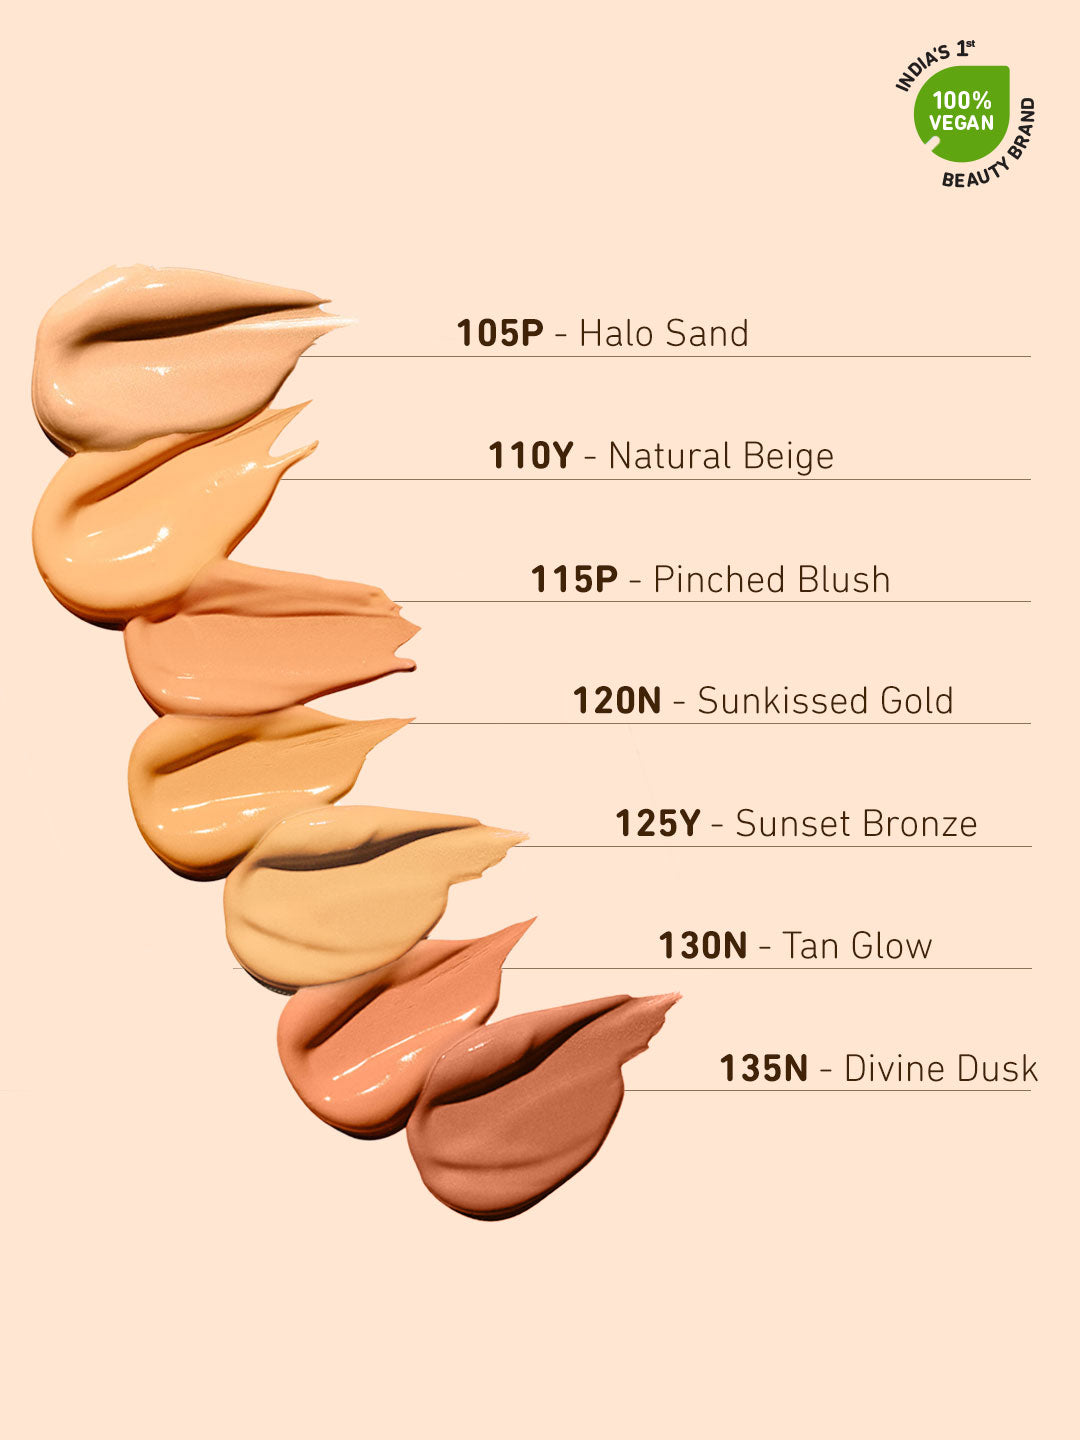 Plum Soft Blend Weightless Foundation | With Hyaluronic Acid | Matte Finish | Super Hydrating | Sunkissed Gold - 120N